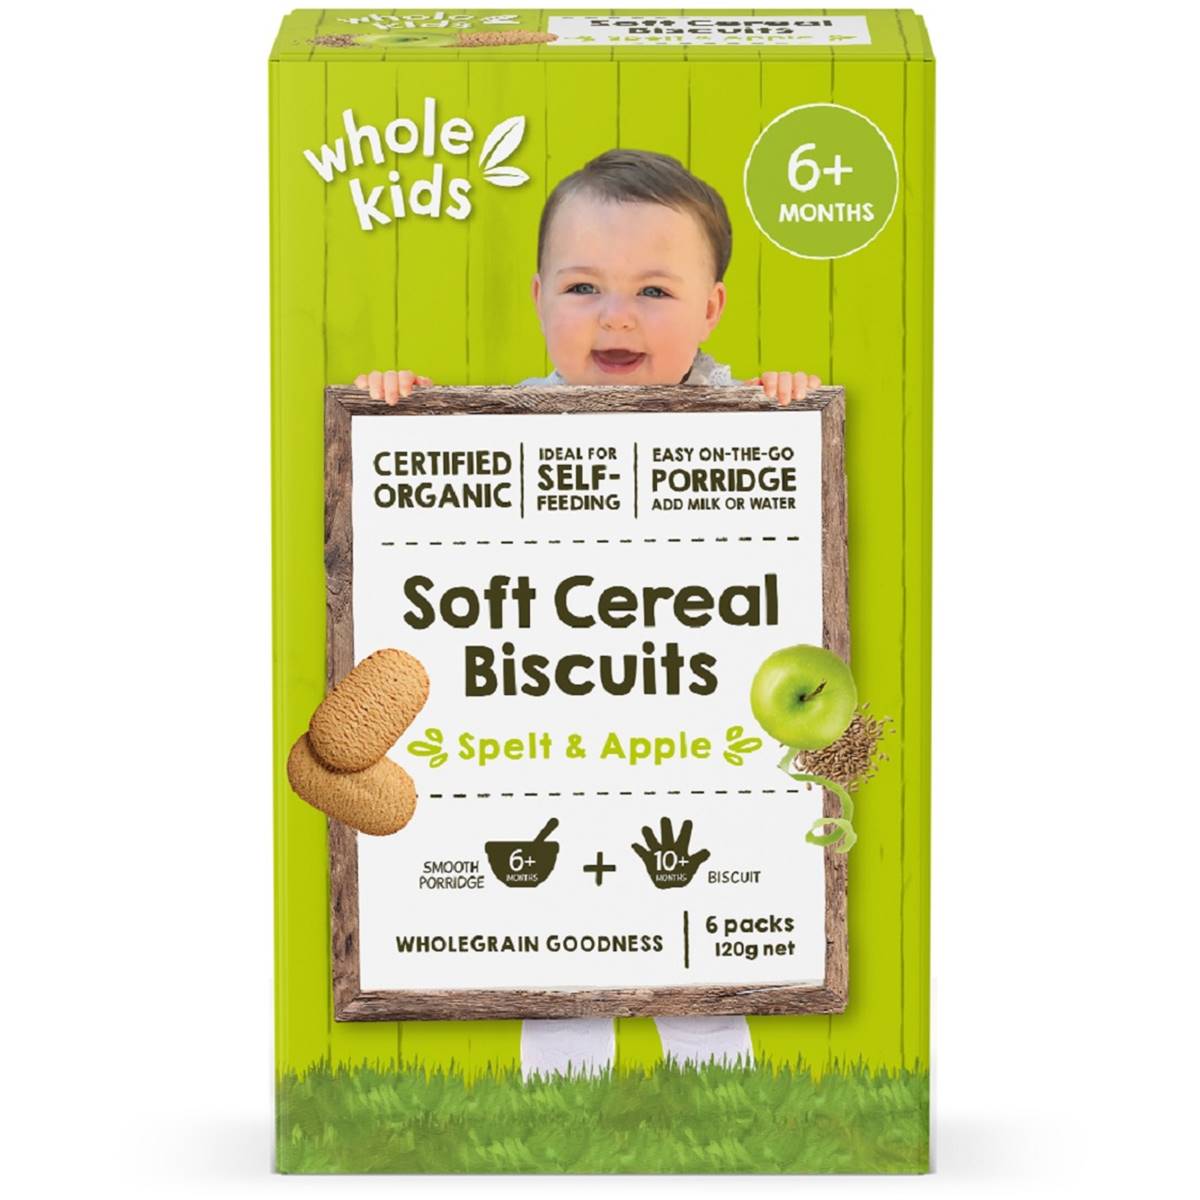 Calories in Whole Kids Organic Soft Cereal Biscuits- Spelt & Apple